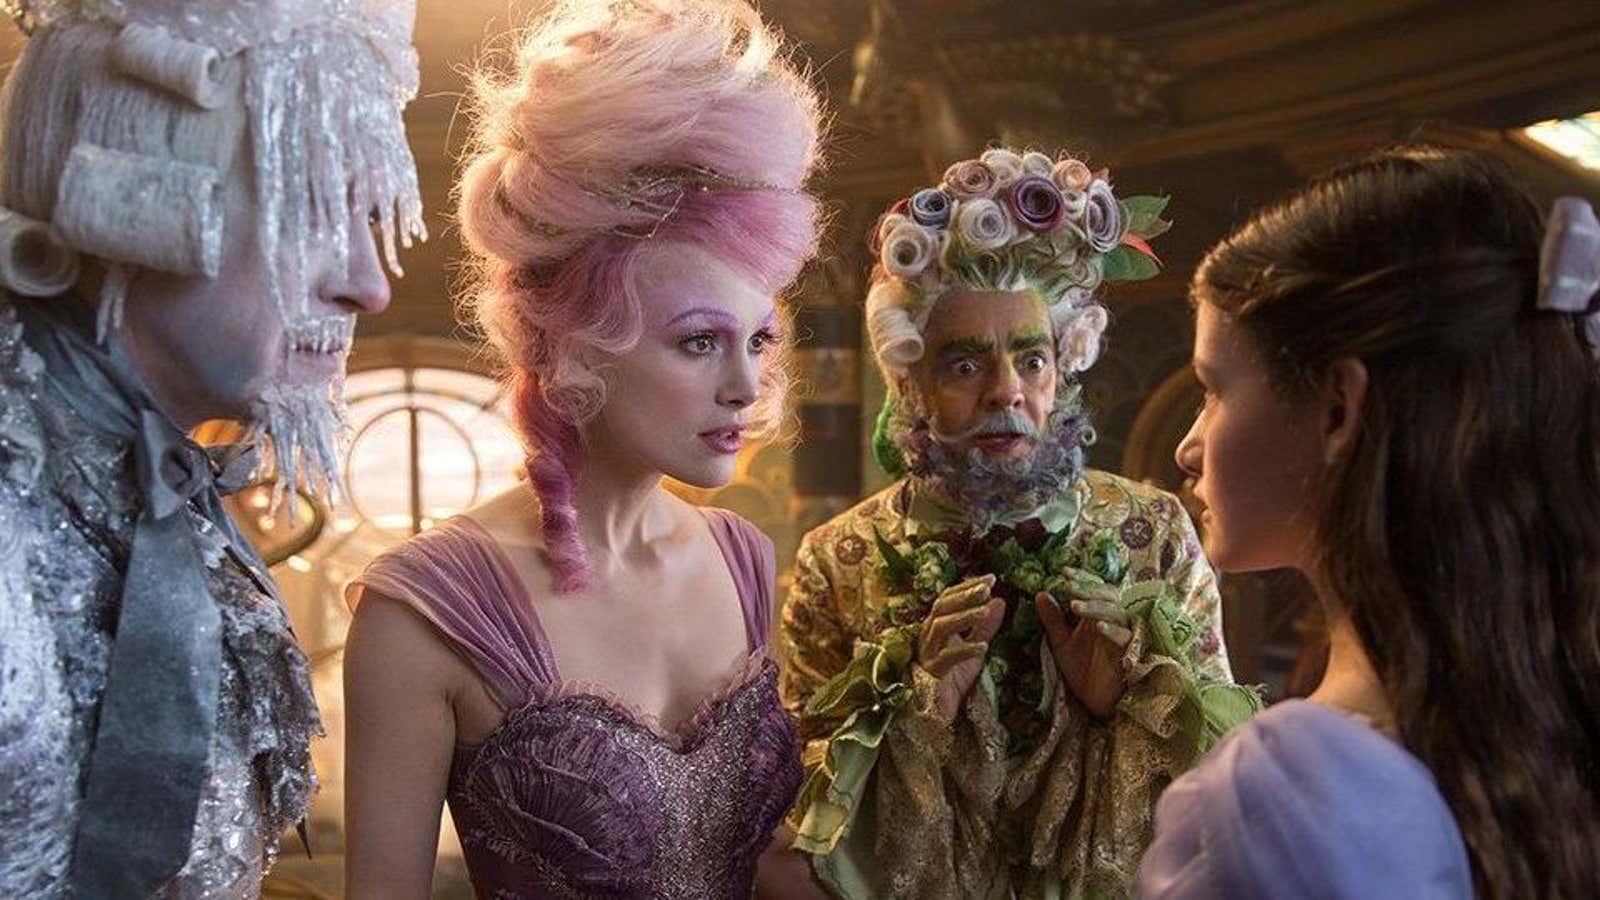 The dancing is worth watching in “The Nutcracker and the Four Realms.”